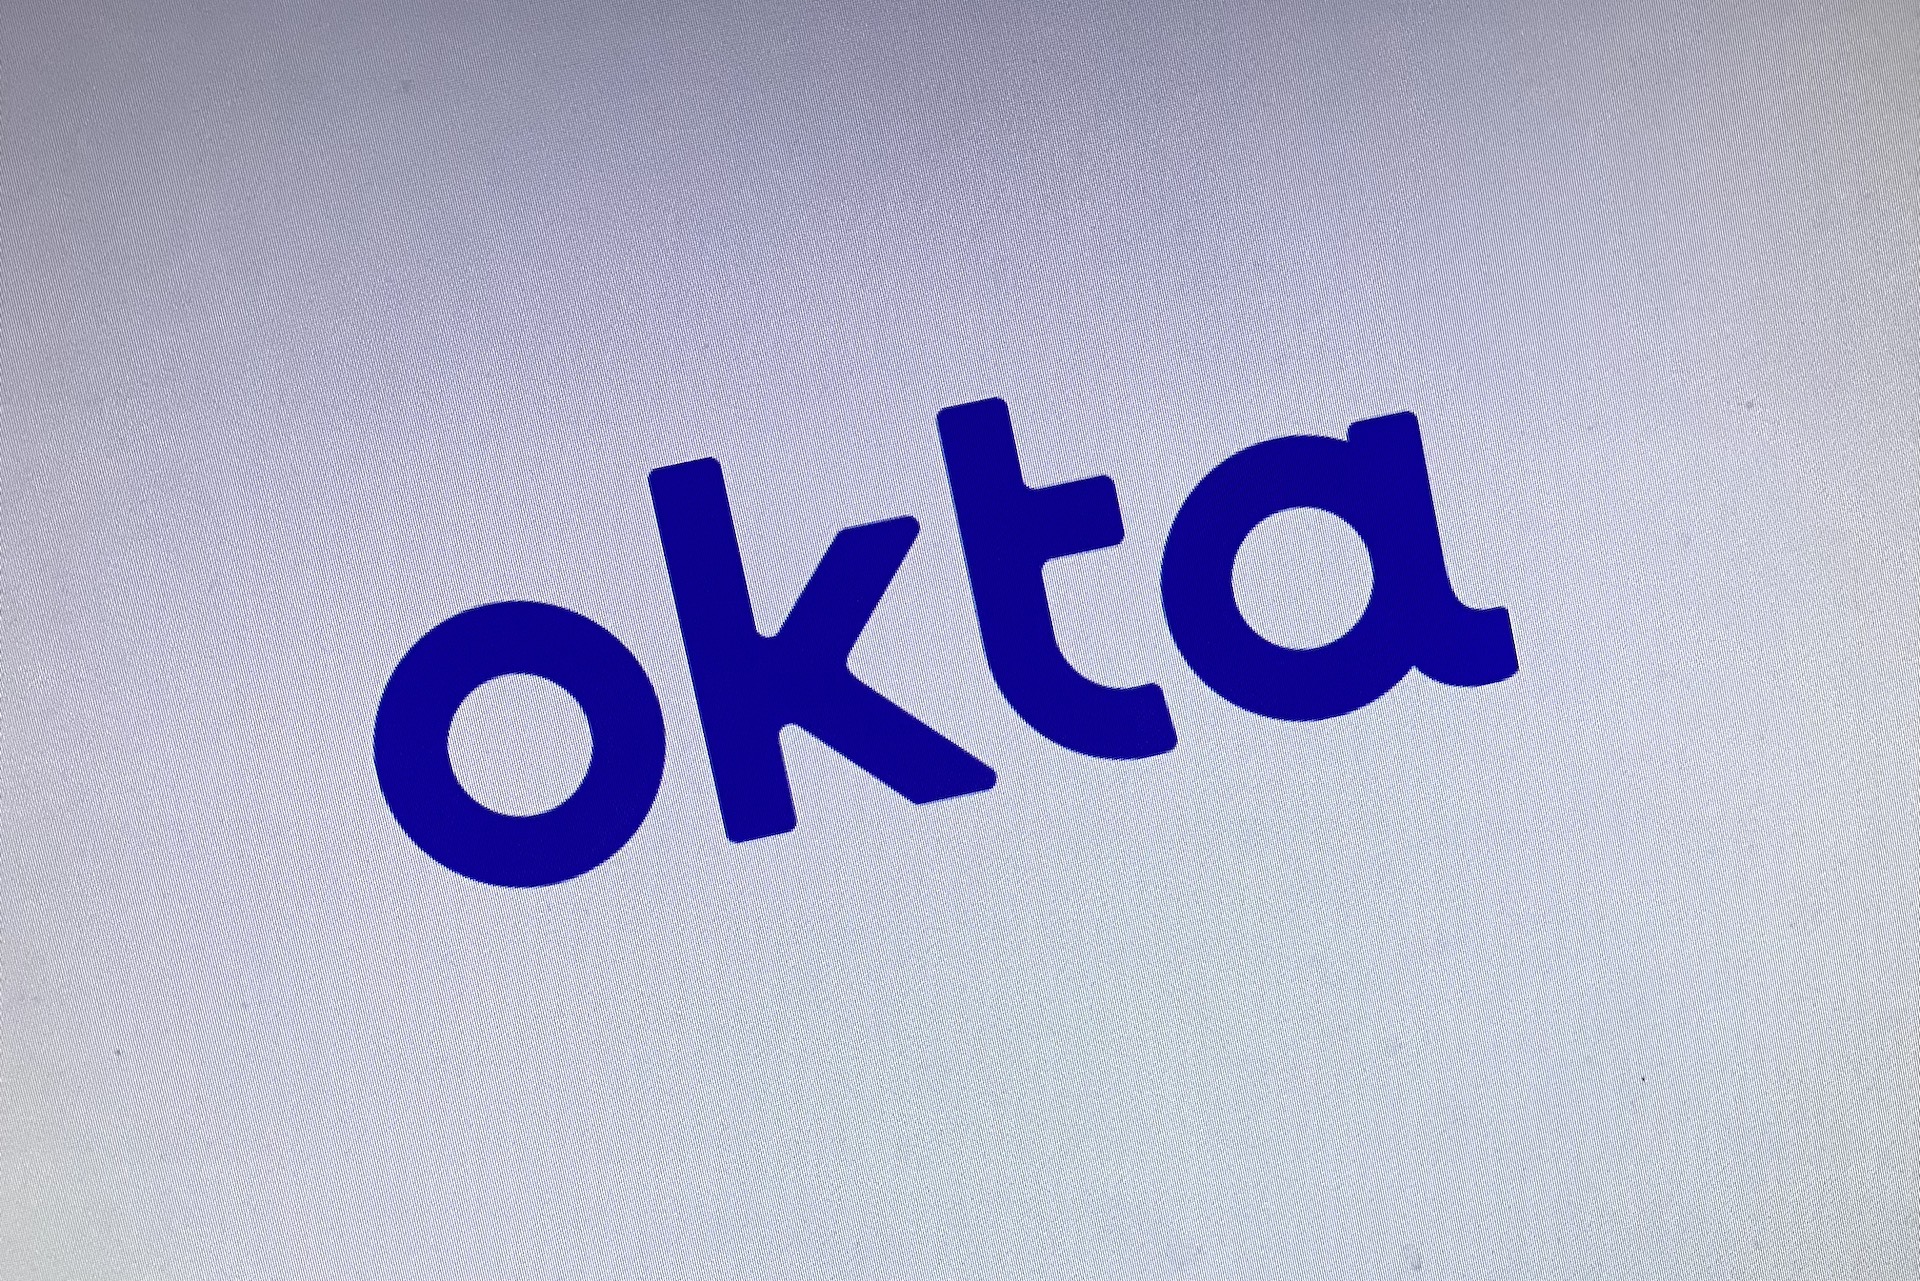 Okta breach leads to questions on disclosure, reliance on thirdparty